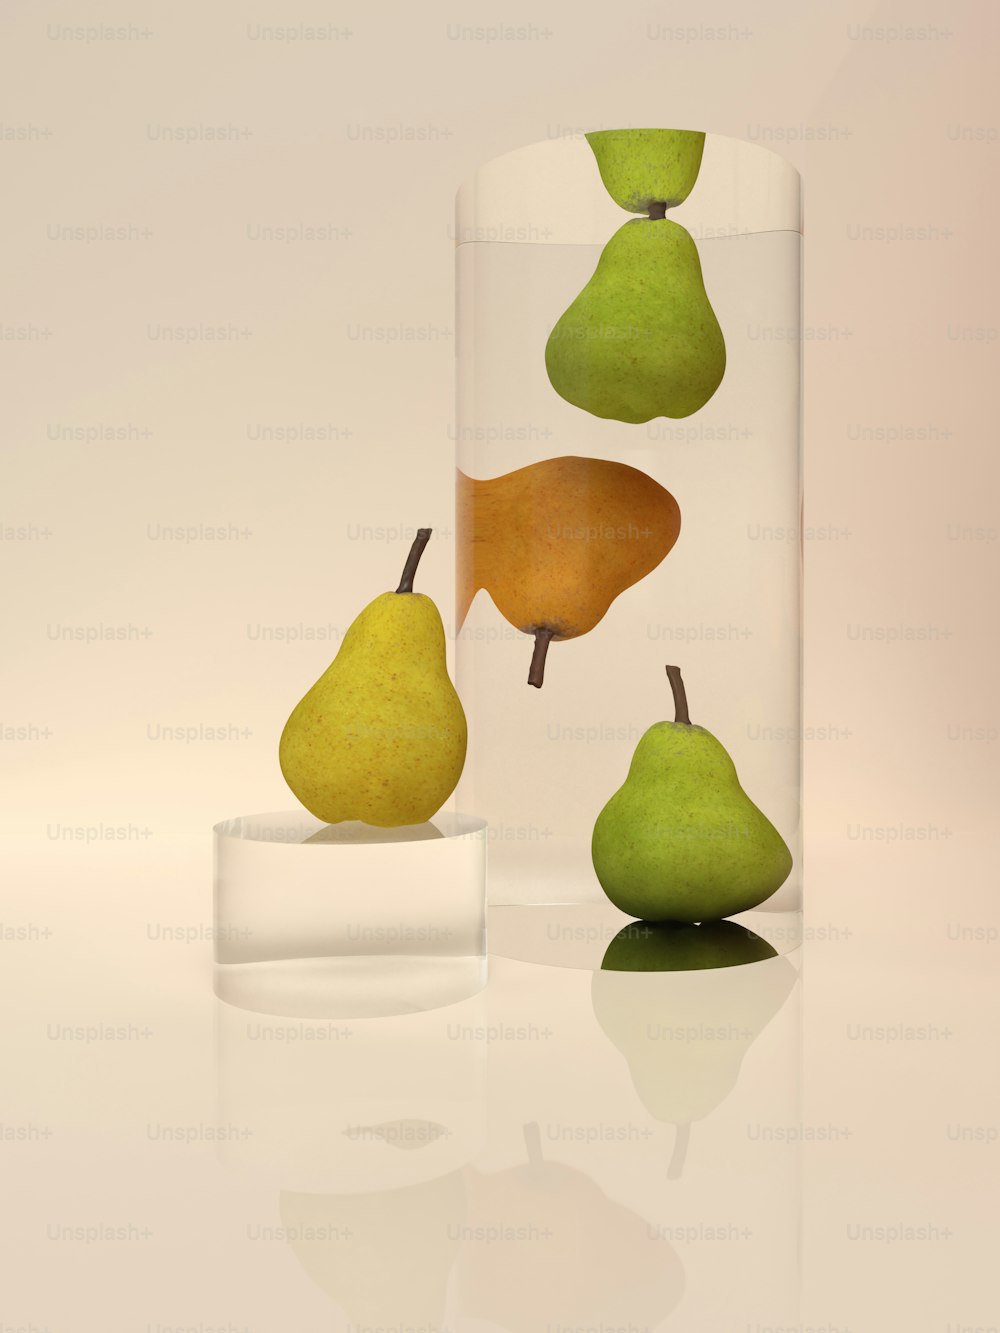 three pears and a pear in a glass vase